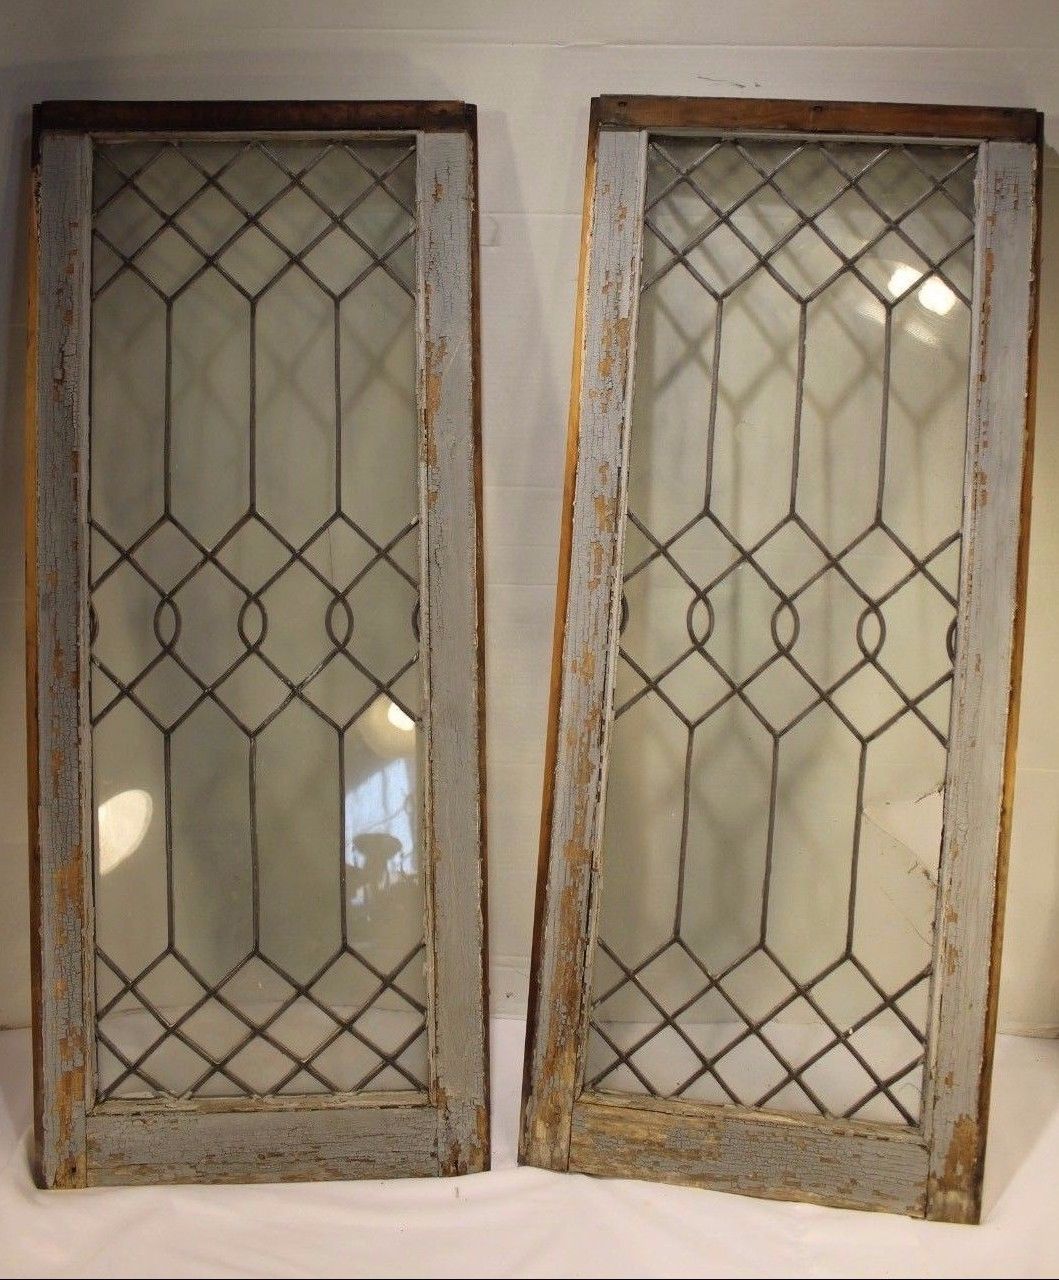 ANTIQUE CLEAR STAINED GLASS WINDOW ORNATE LEAD STYLE VINTAGE